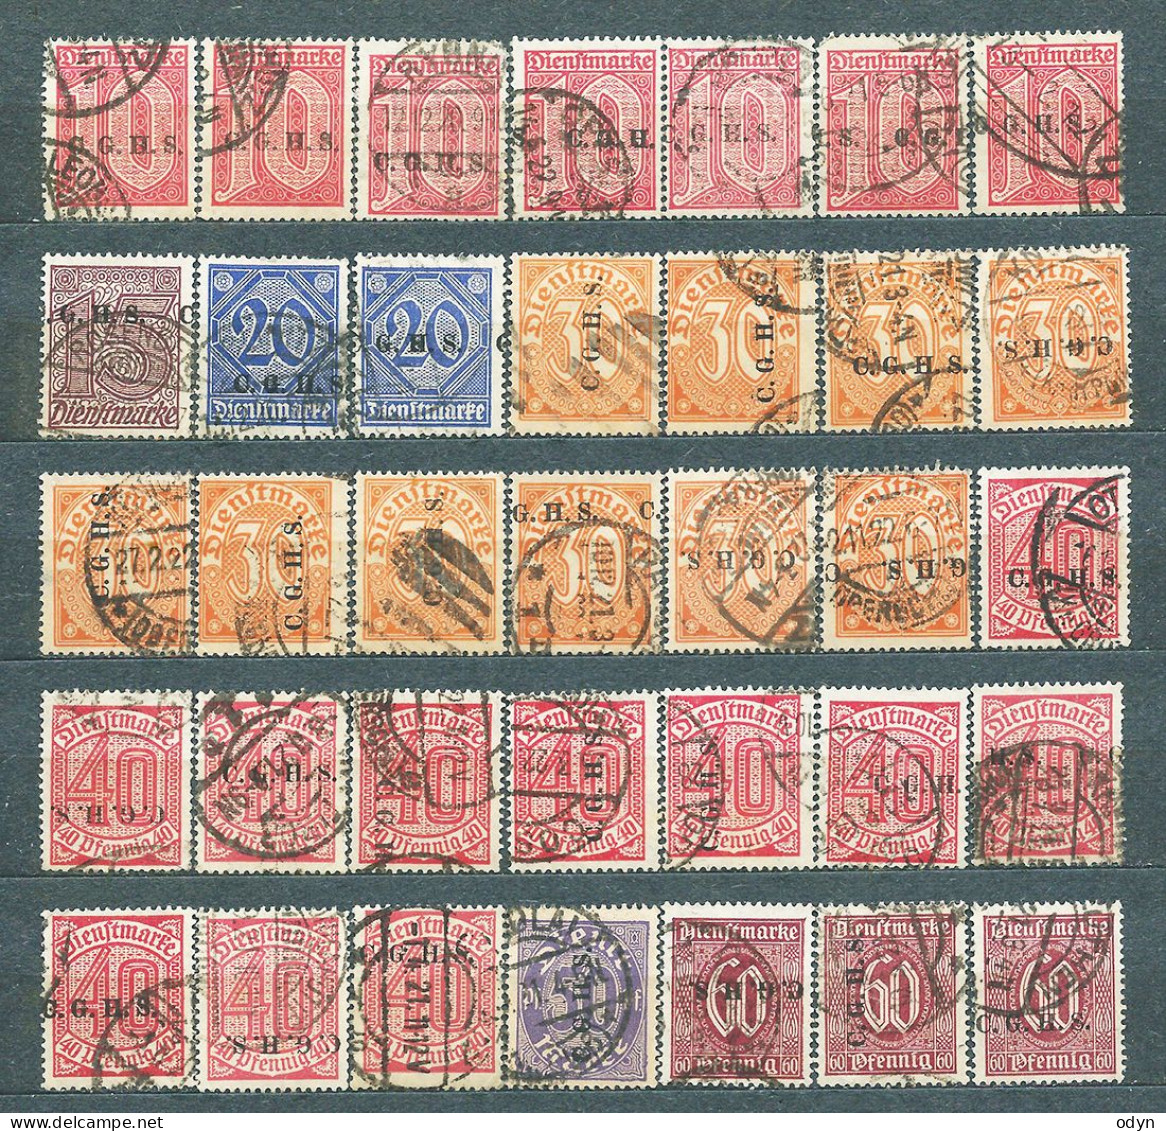 Upper Silesia, 1920, Officials, 82 Stamps From Set MiNr 8-20 (incl. 4 Stamps #18 Wz. 1) - Overprint C.G.H.S. - Used - Schlesien